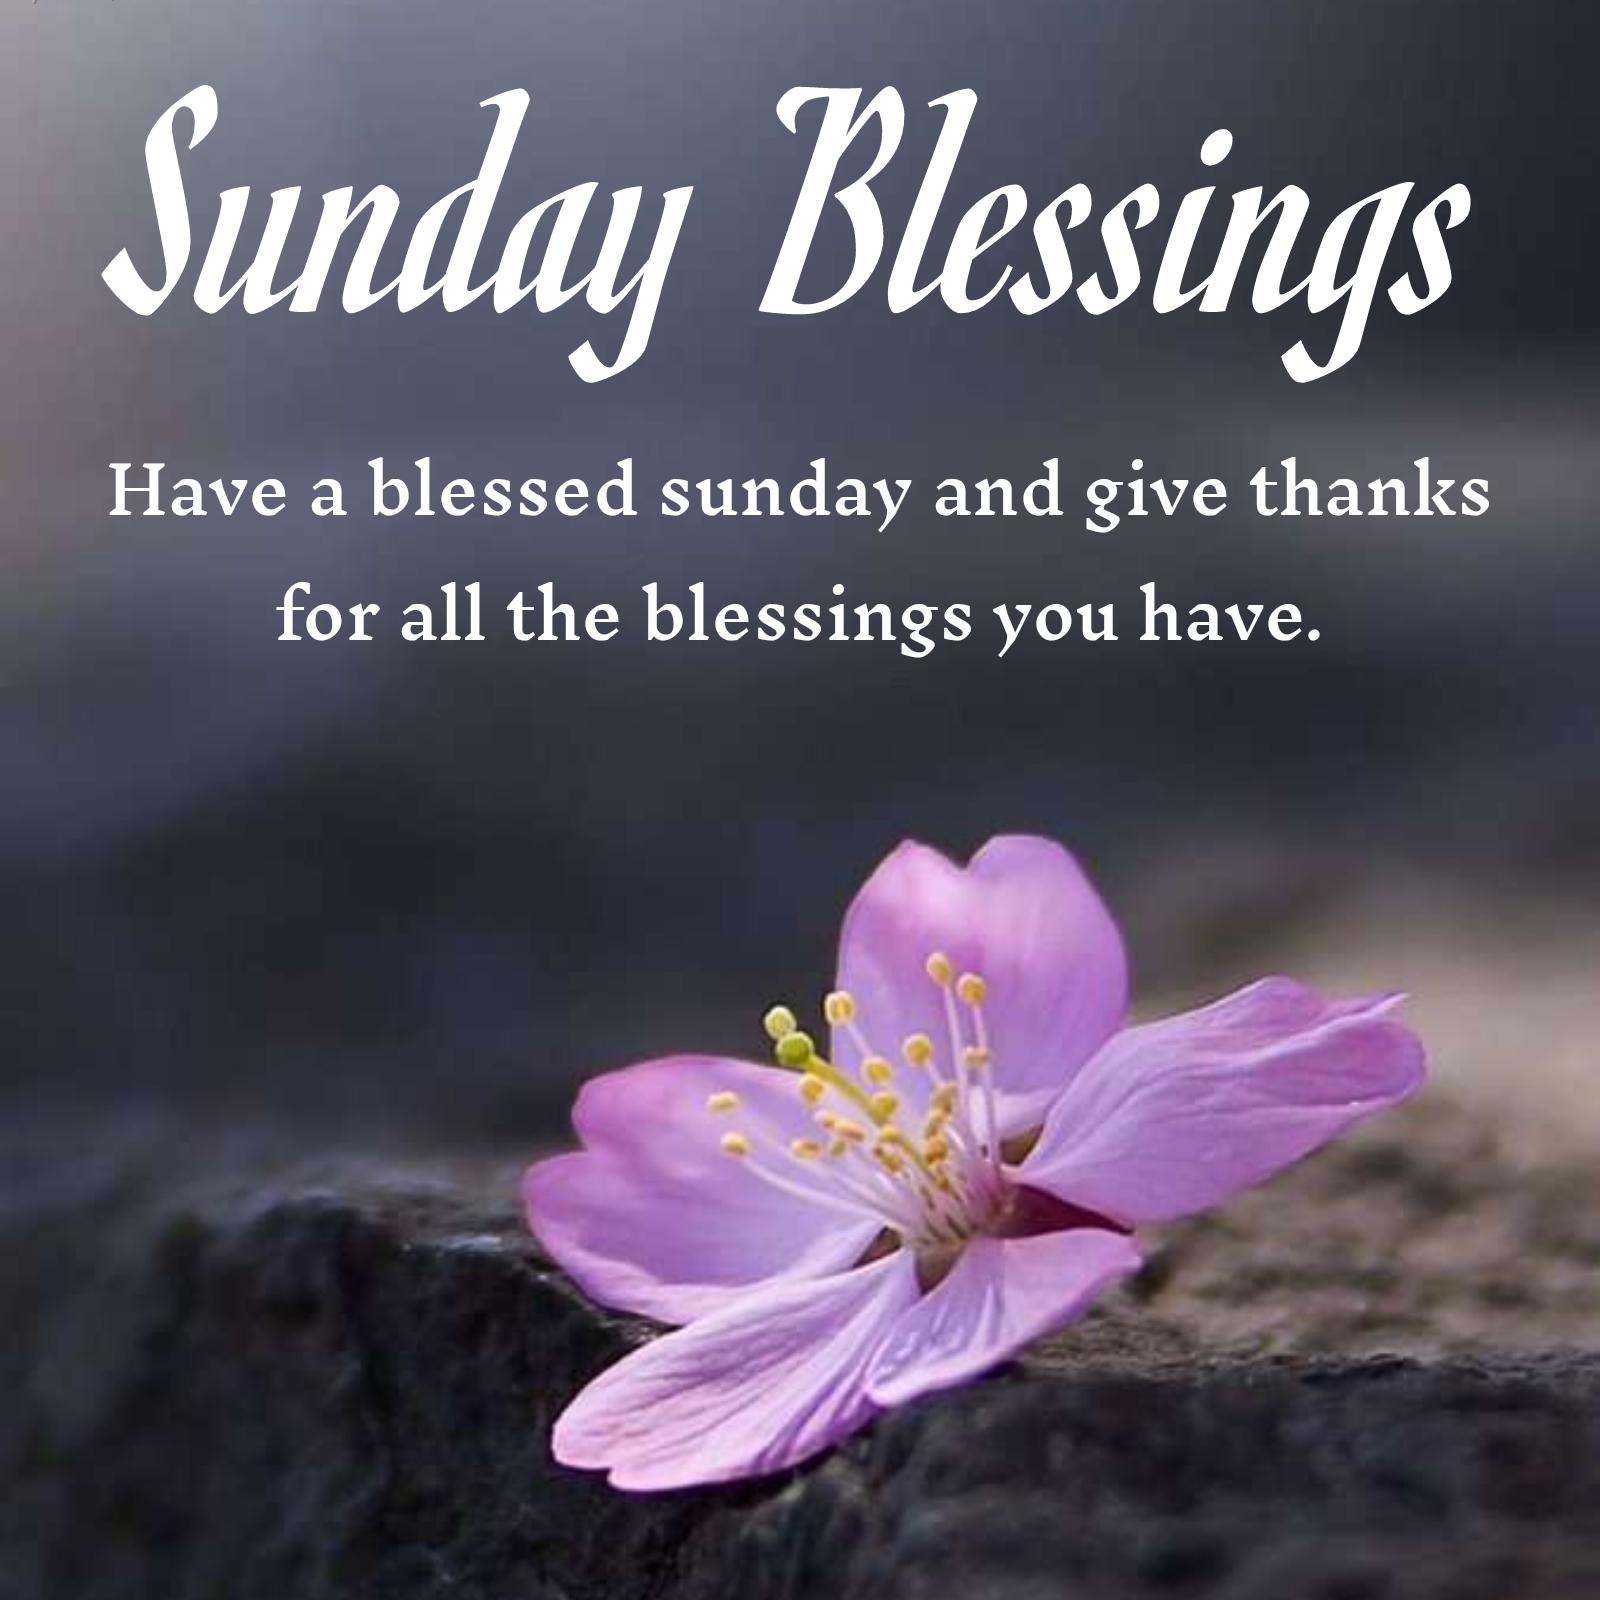 Have a blessed sunday and give thanks for all the blessings you have